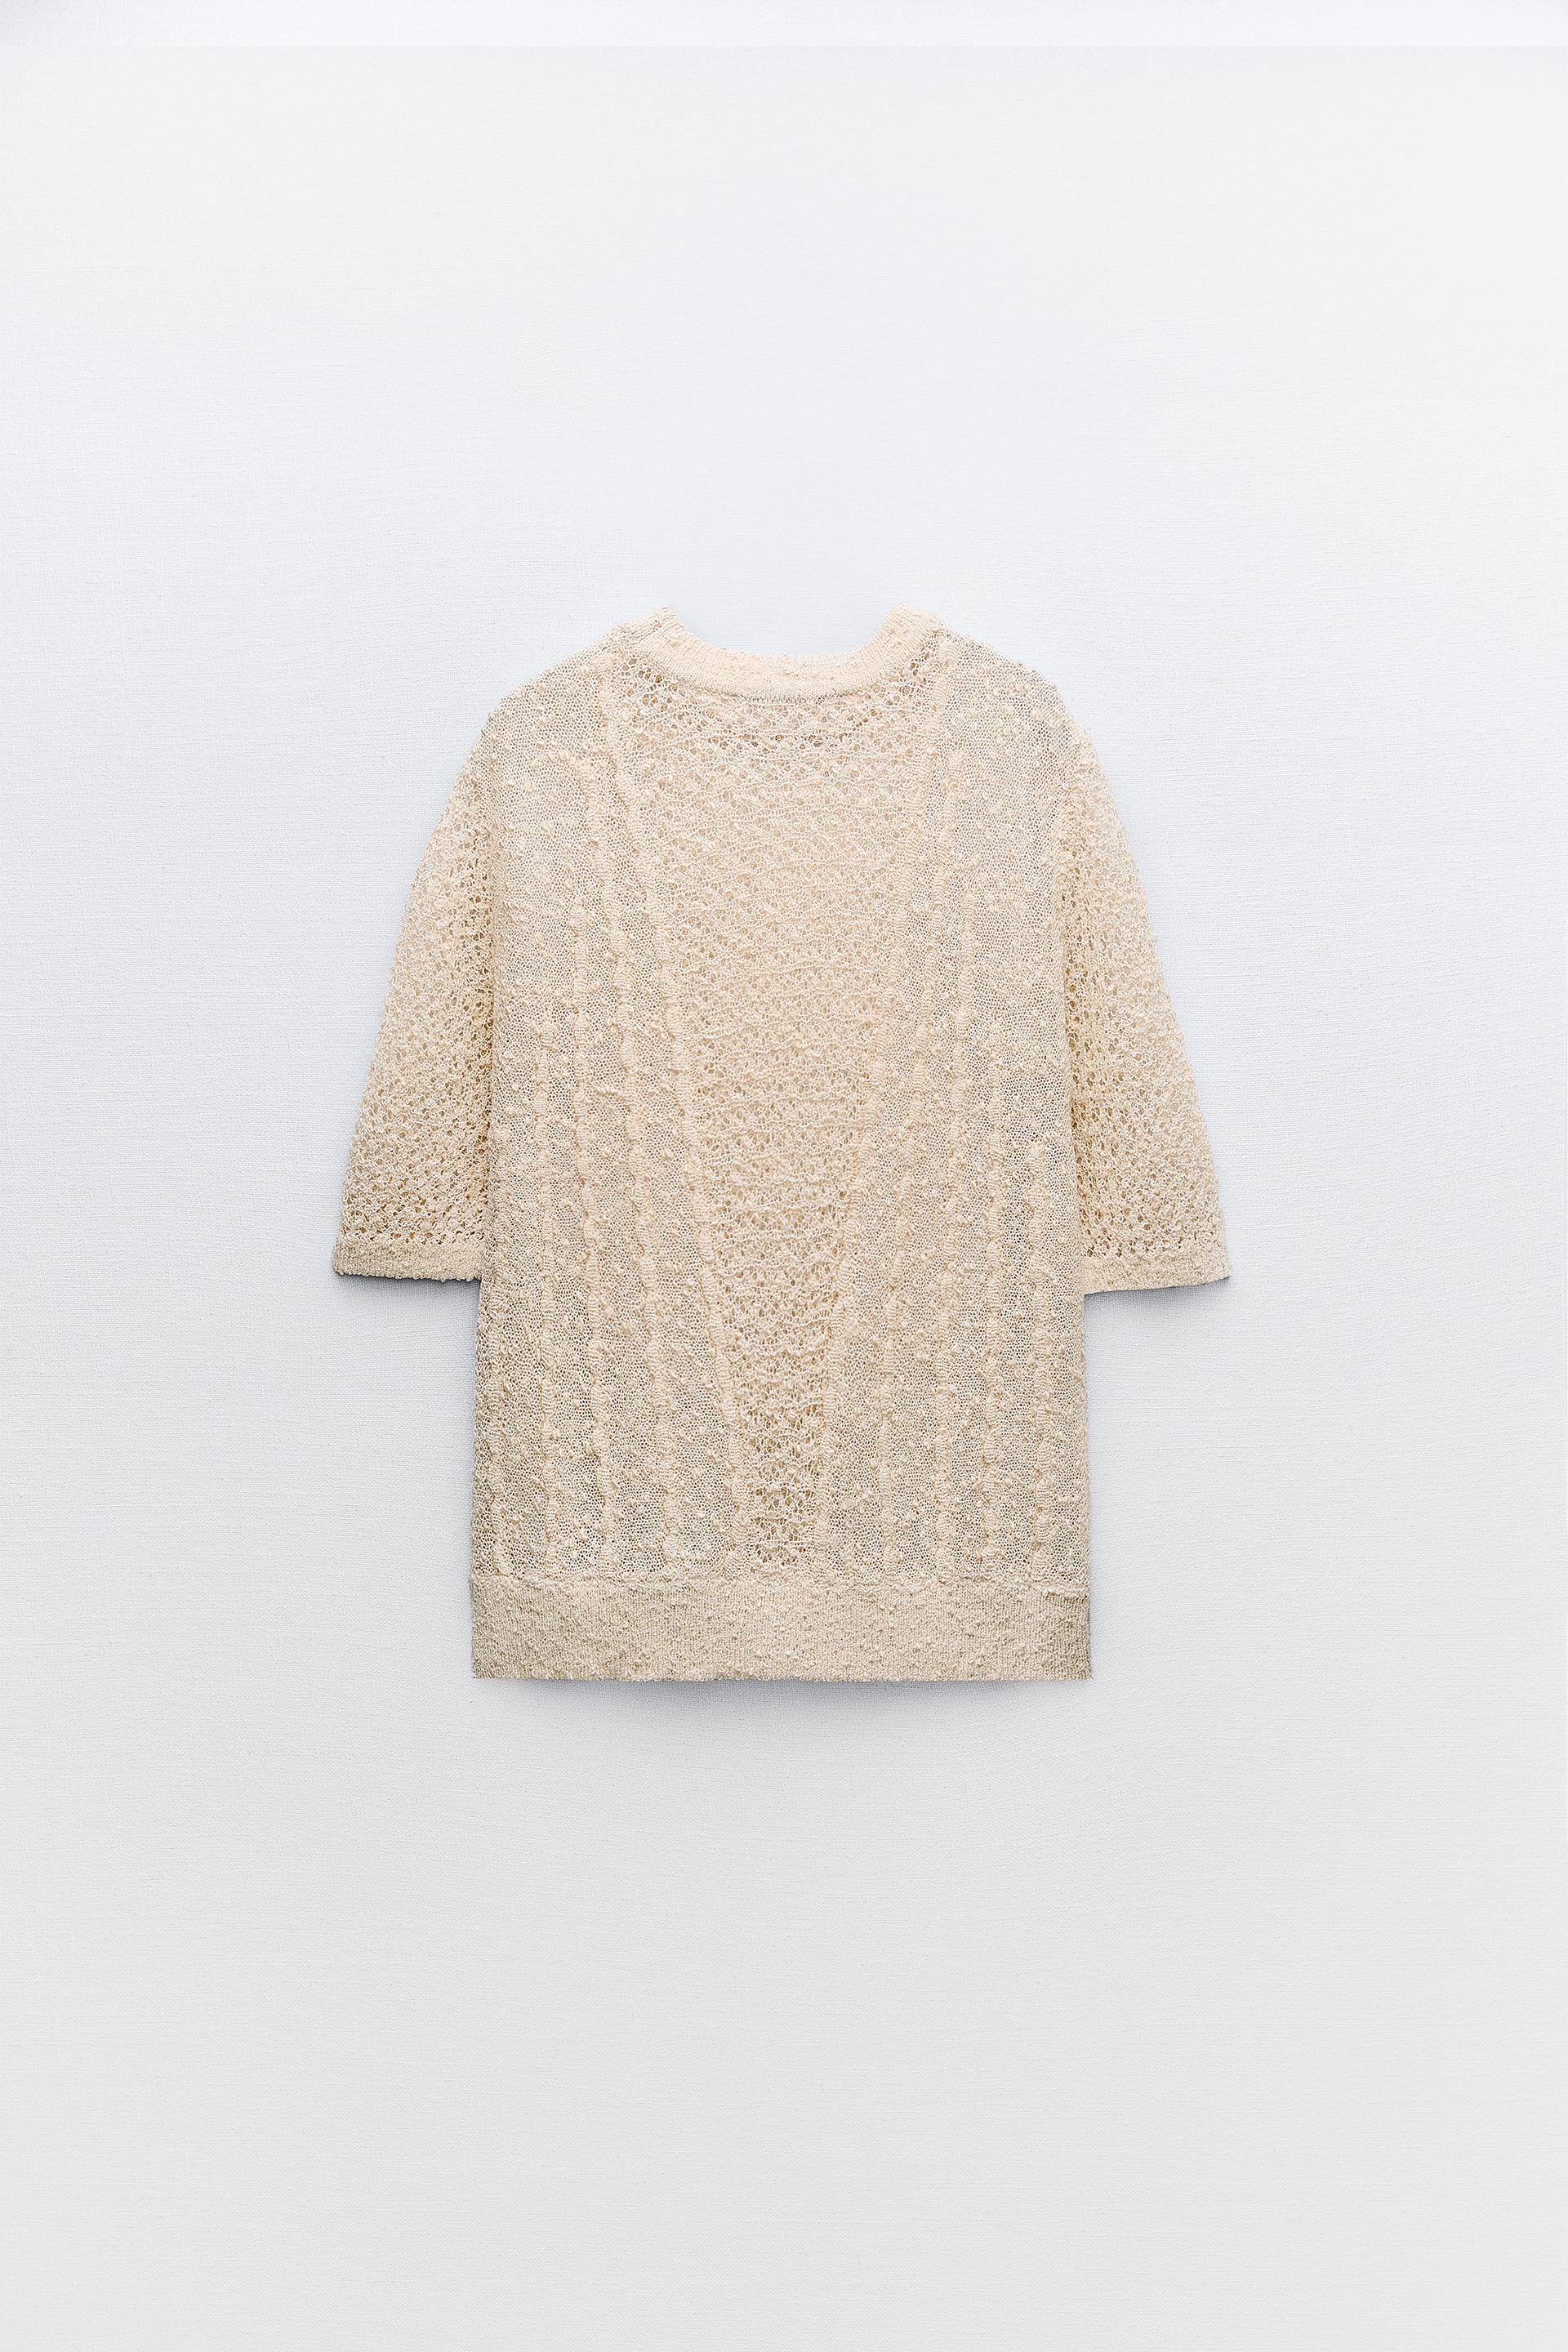  Solid Pointelle Knit Sweater (Color : Beige, Size